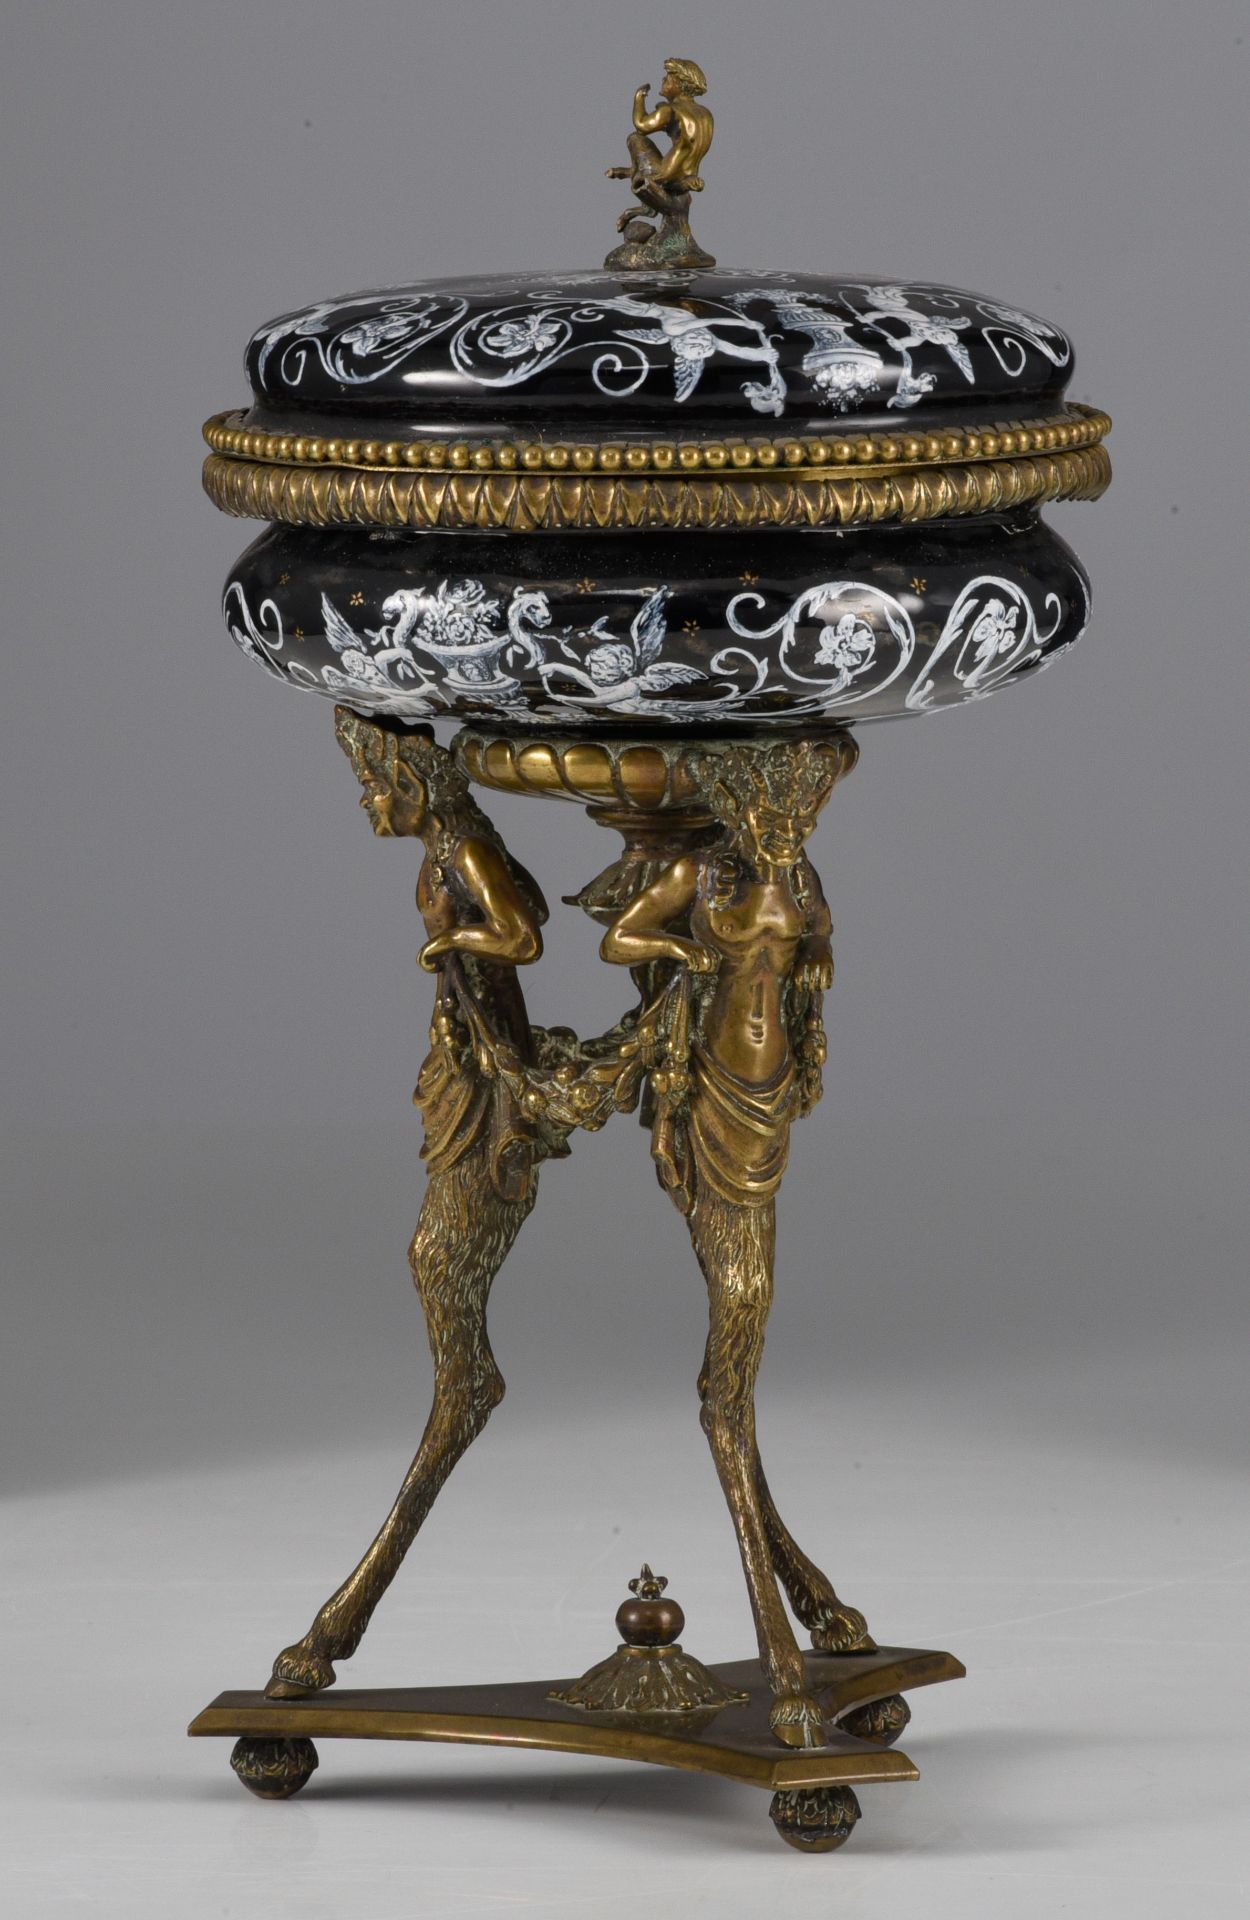 A Limoges enamel box with cover and a tazza with cover, Napoleon III period, H 8 - 23 cm - Image 11 of 16